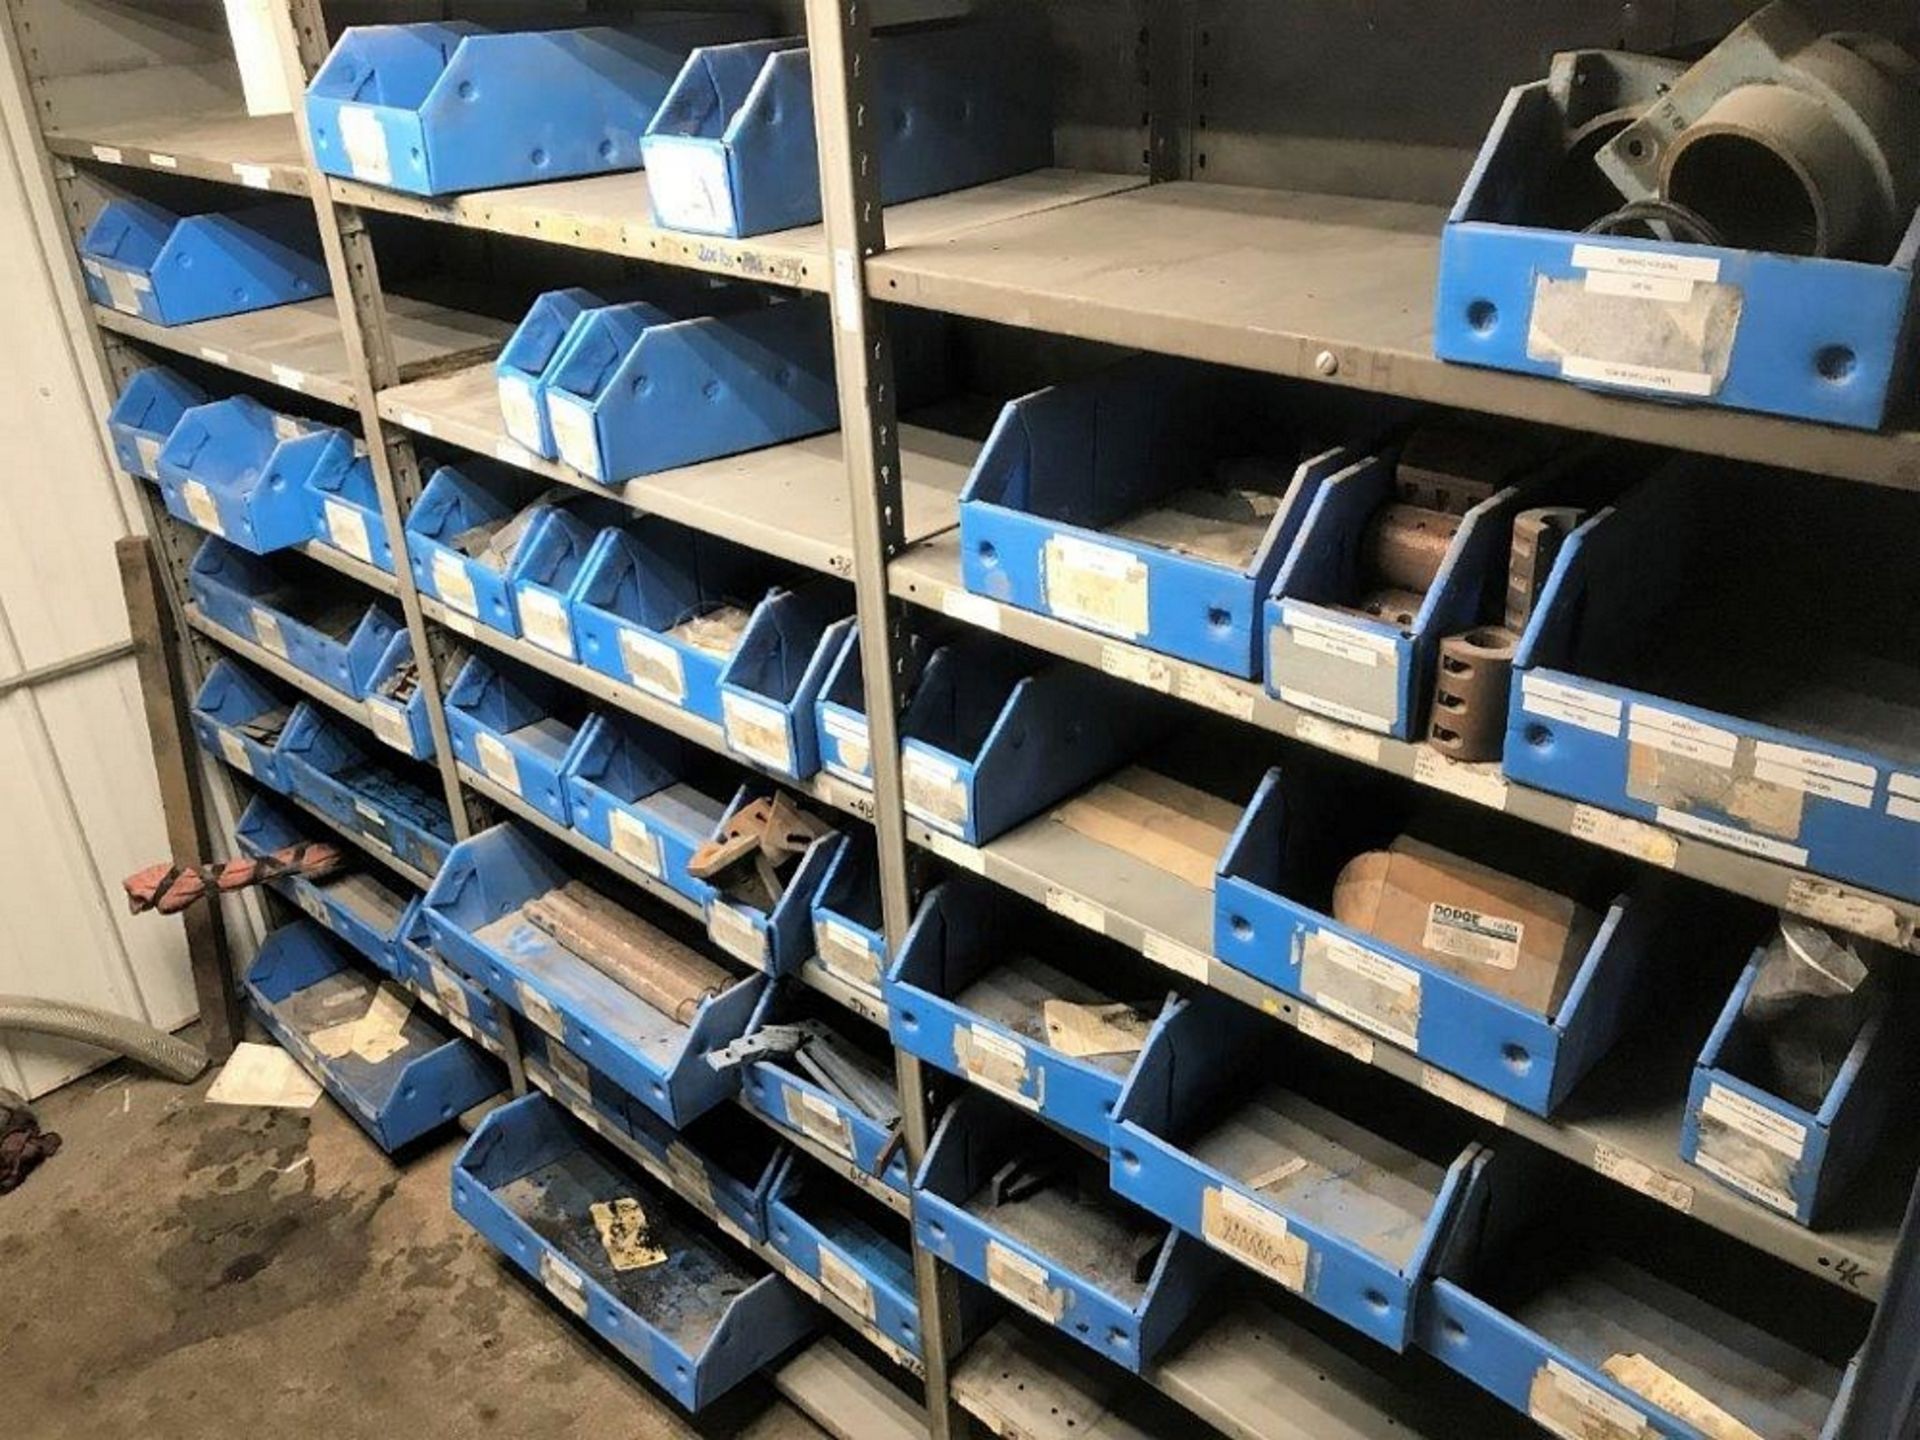 (10) SECTION SHELVING WITH ASSORTED HYDRAULIC VALVE, GEAR WHEELS, BUSHING, SPLIT COLLAR SLEEVE, - Image 3 of 10